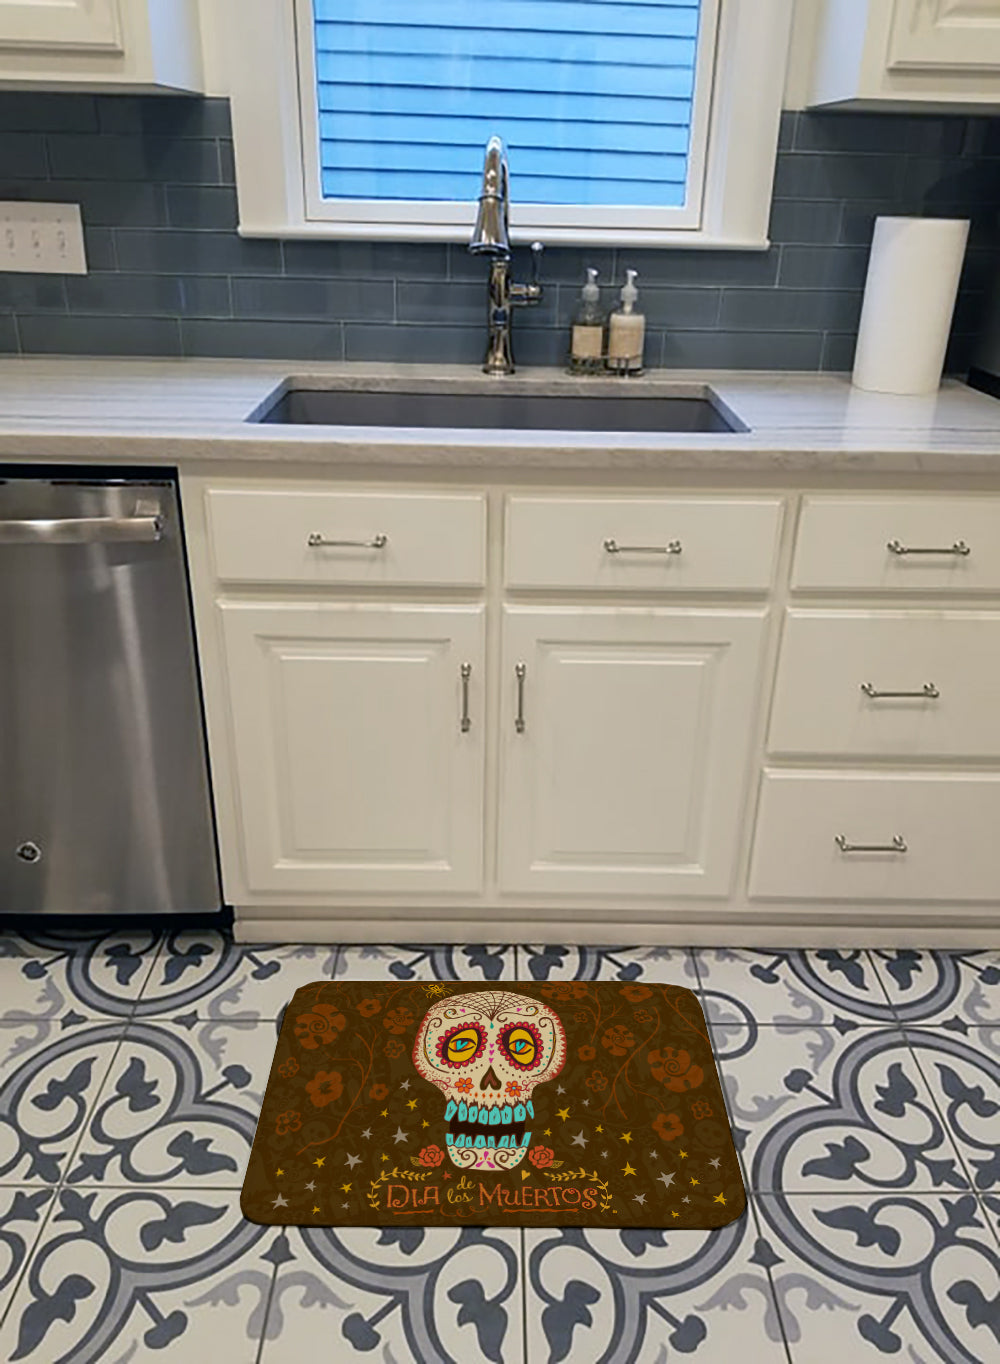 Day of the Dead Machine Washable Memory Foam Mat VHA3031RUG - the-store.com